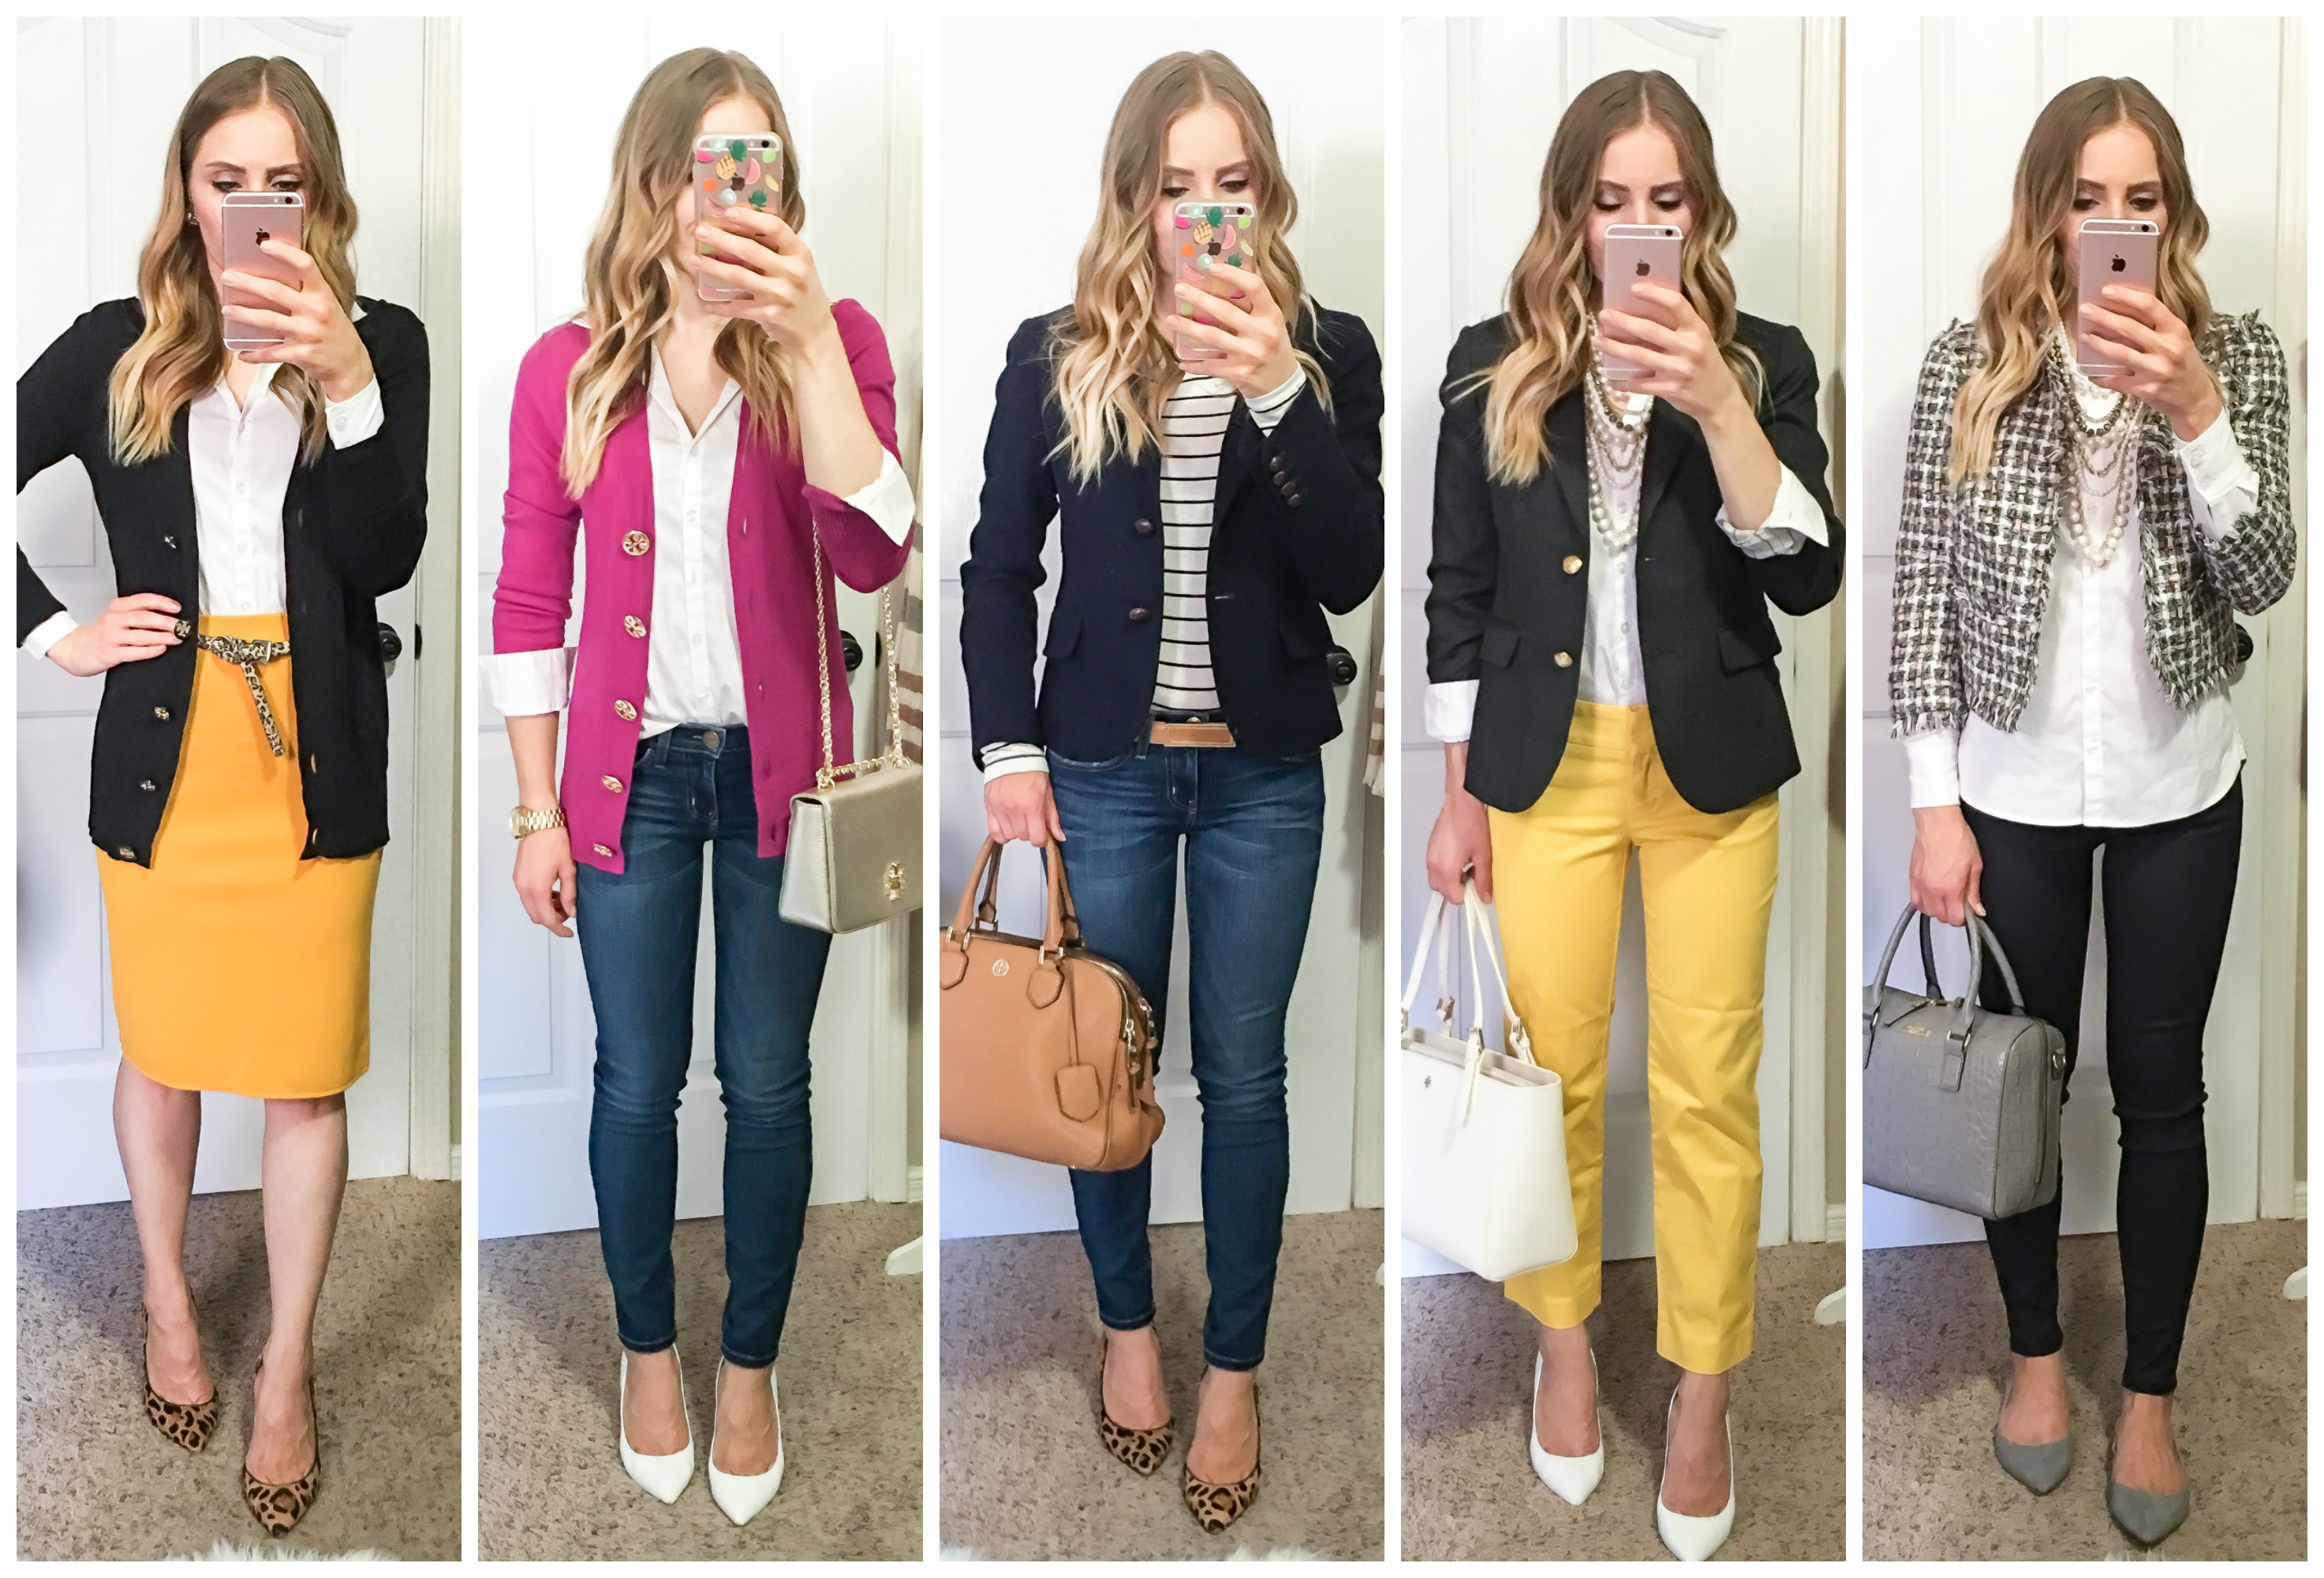 5 Business Casual & Casual Work Attire Outfits for Fall | Glamour-Zine